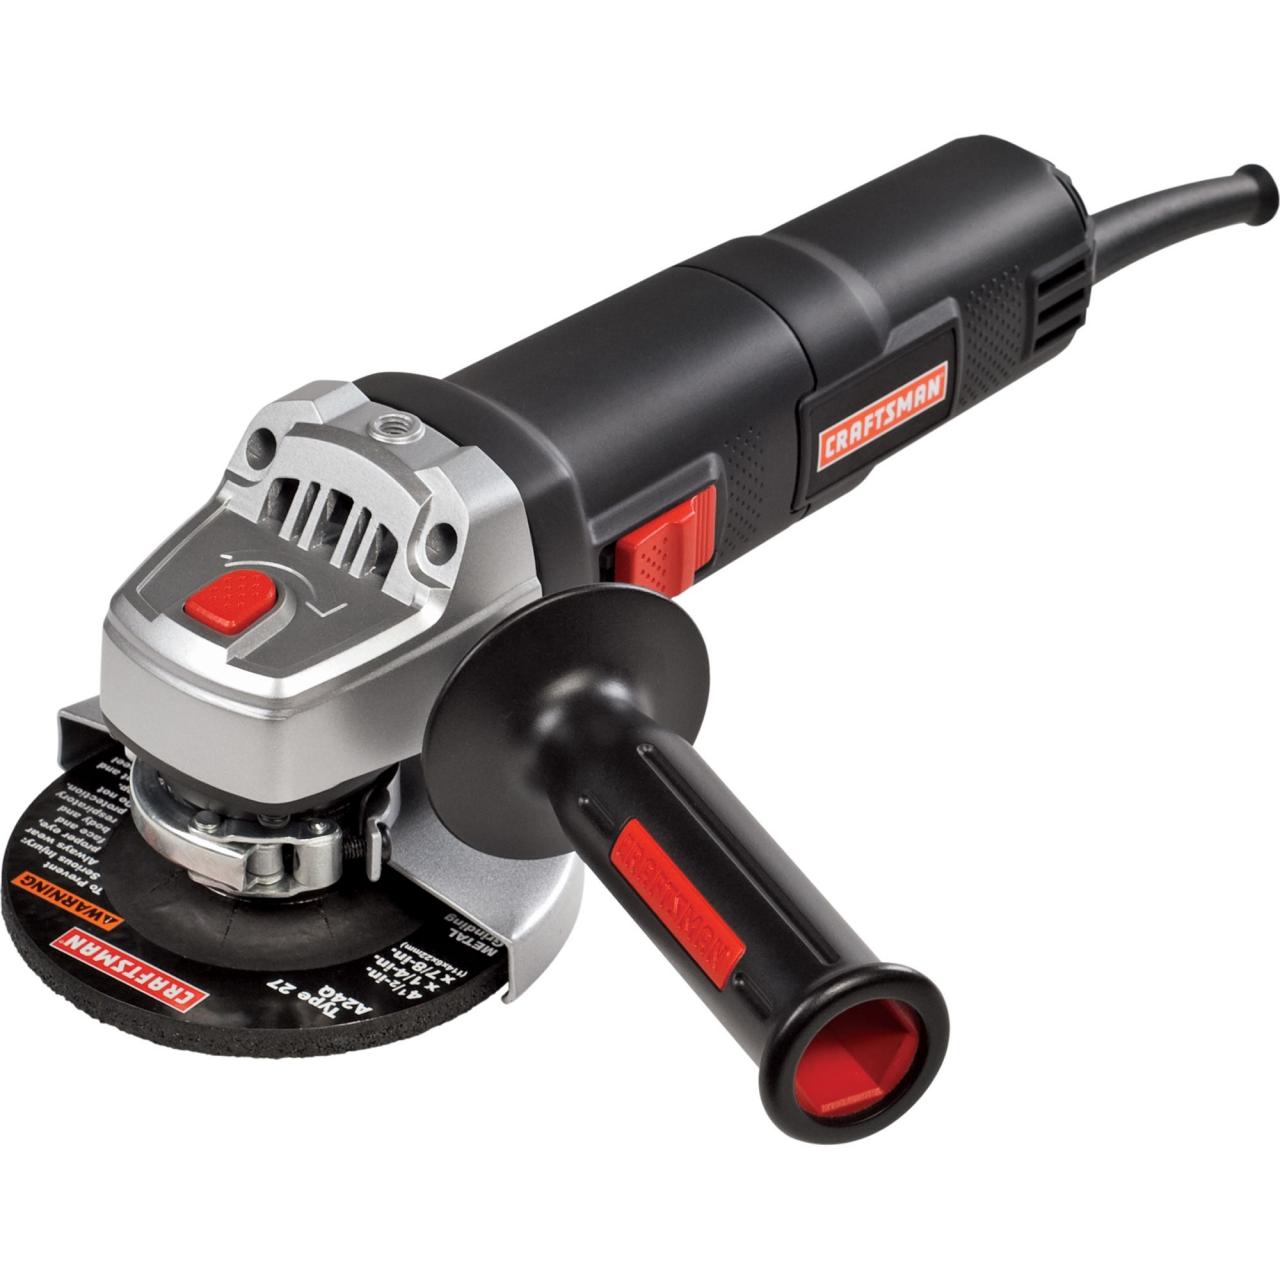 Craftsman 4 1/2 in. Small Angle Grinder